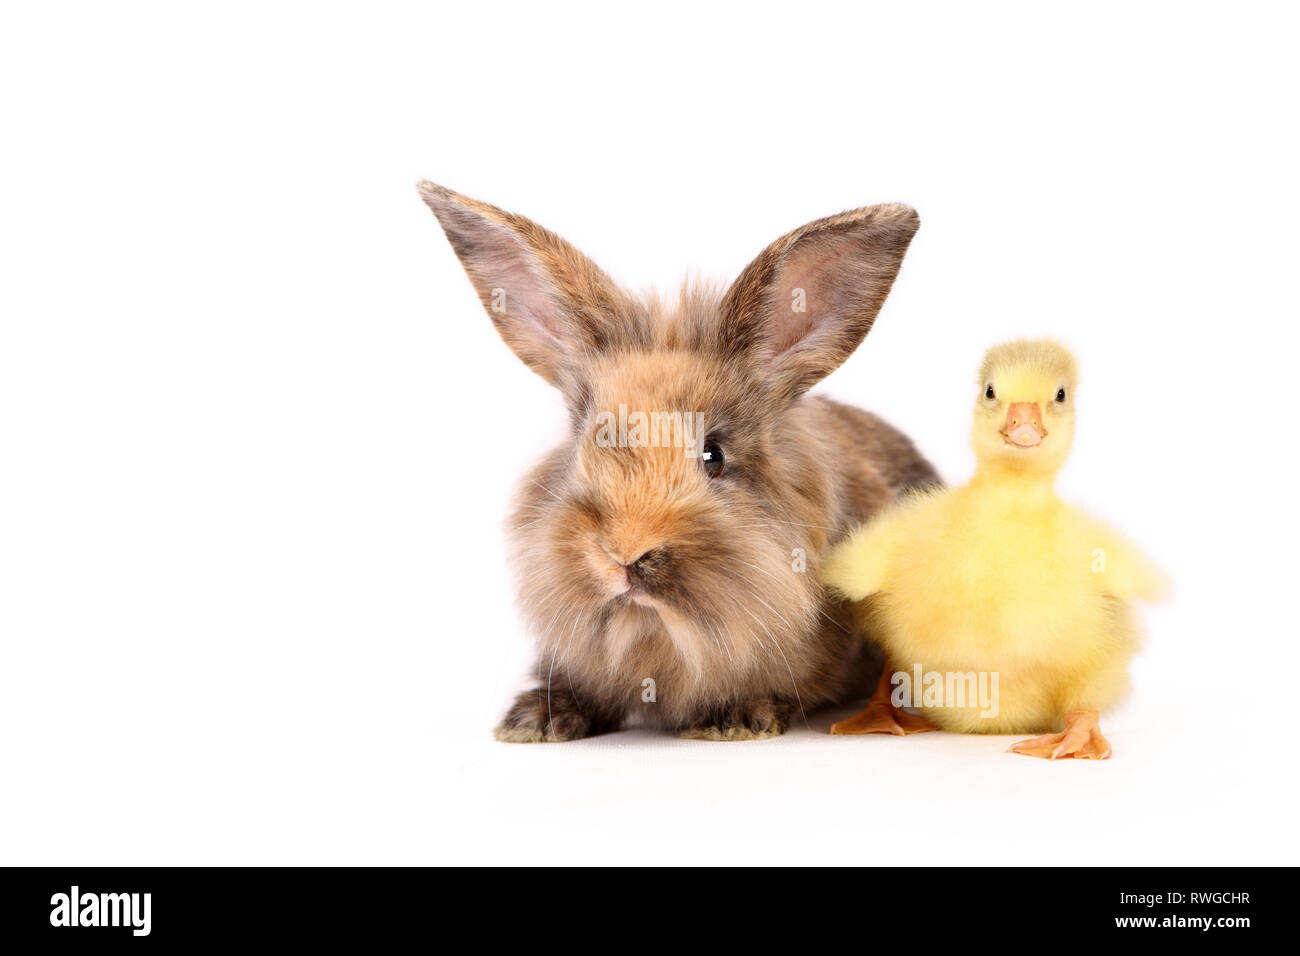 Domestic Goose. Gosling sitting next to adult Dwarf Rabbit. Studio picture, seen against a white background. Germany Stock Photo